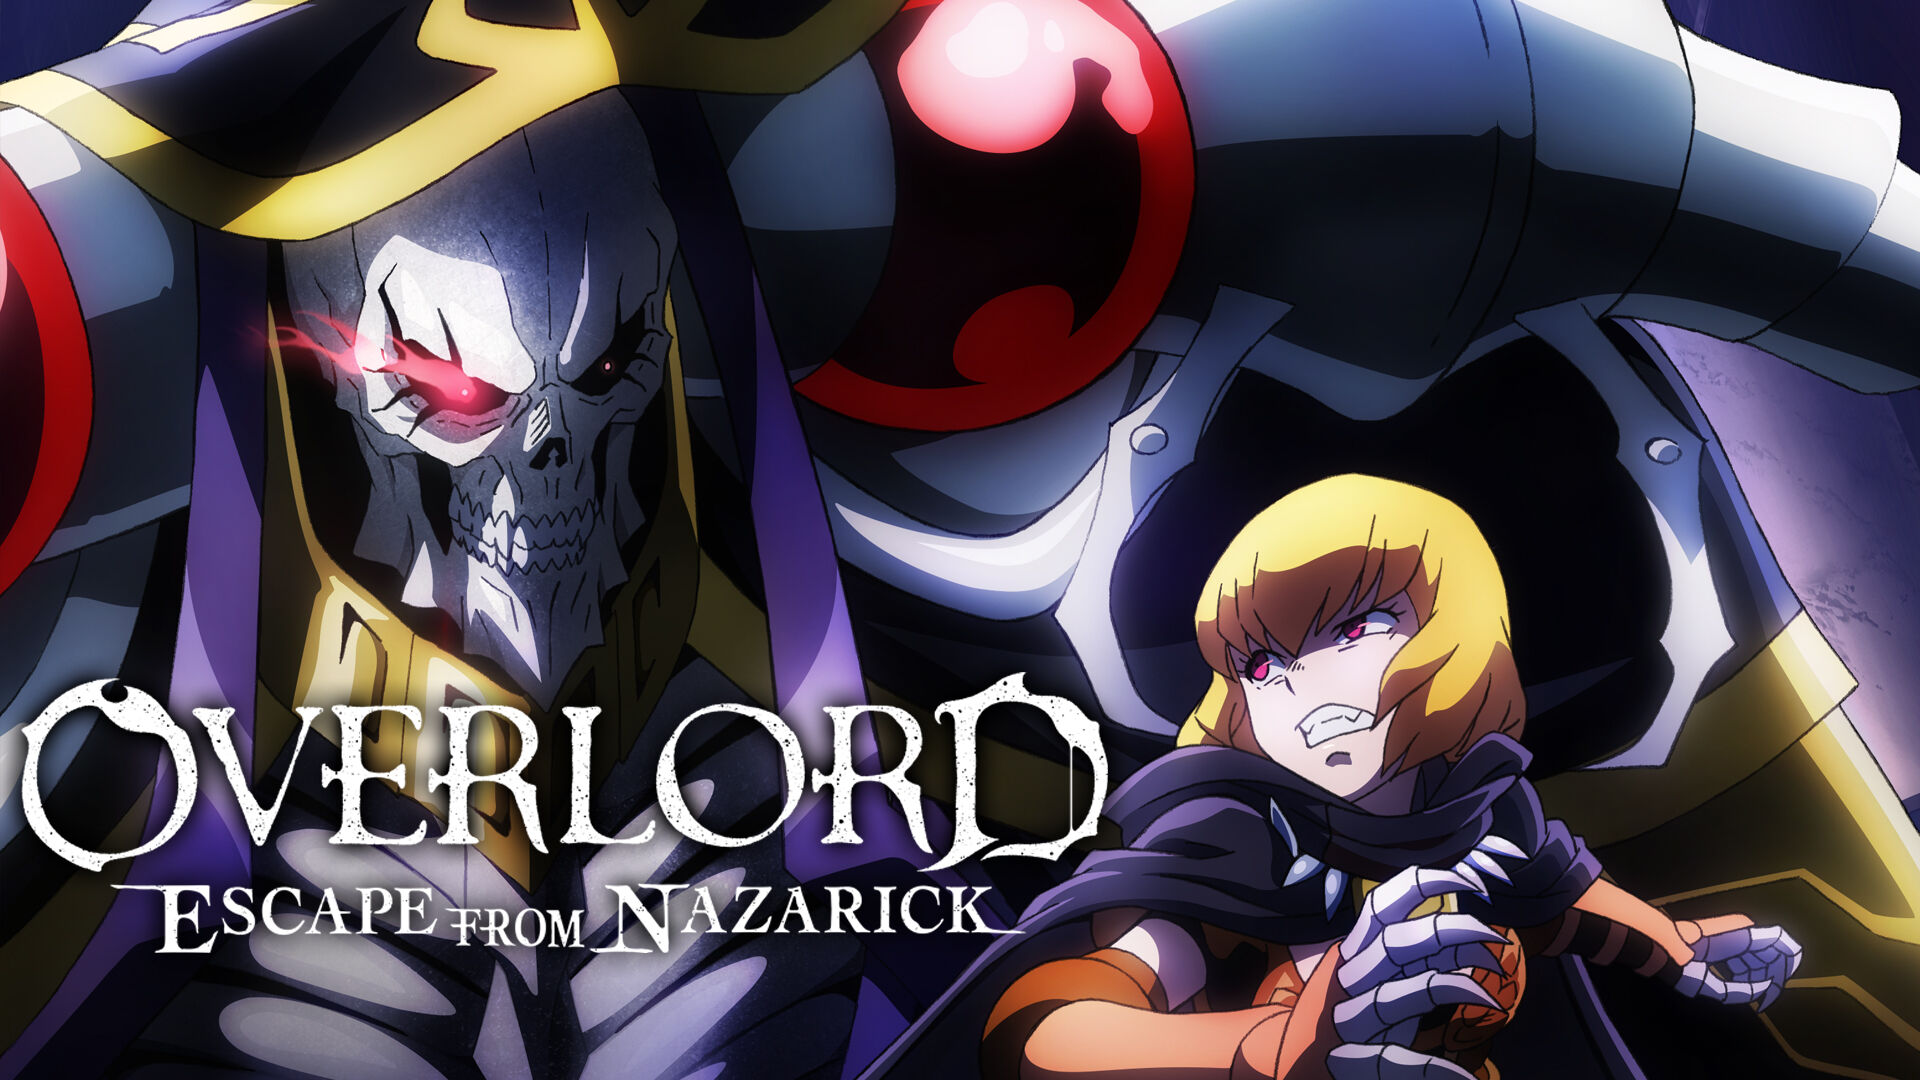 OVERLORD: ESCAPE FROM NAZARICK ダウンロード版 | My Nintendo Store 